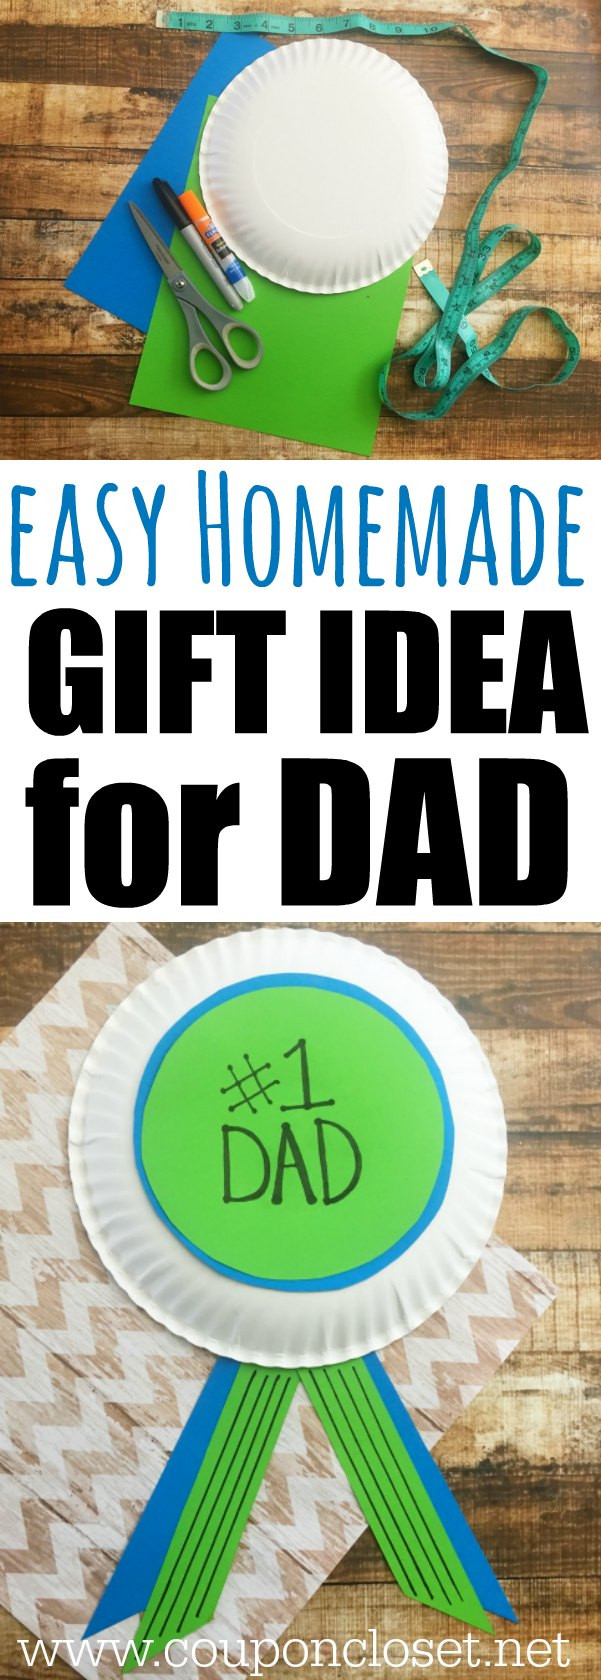 Diy Fathers Day
 Homemade Father s Day Gift Idea 1 Dad Award e Crazy Mom